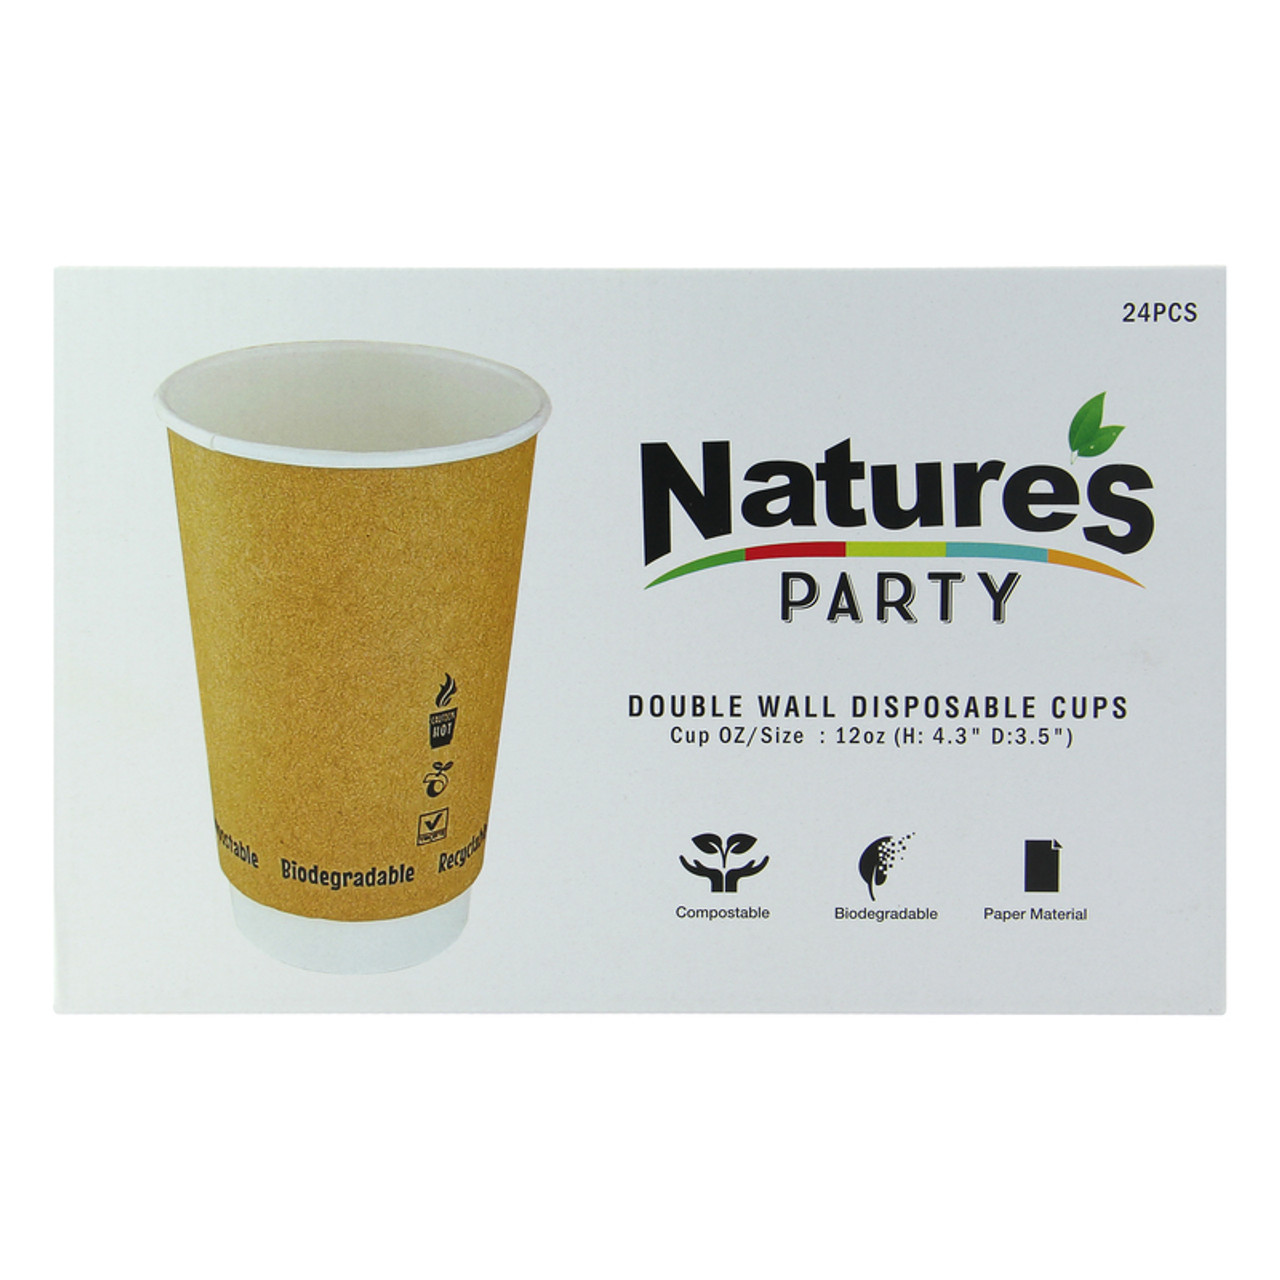 8NPGCDW12KR Double Wall Kraft Compostable Paper Cup 12oz D:3.5in H:4.3in - 24 pcs